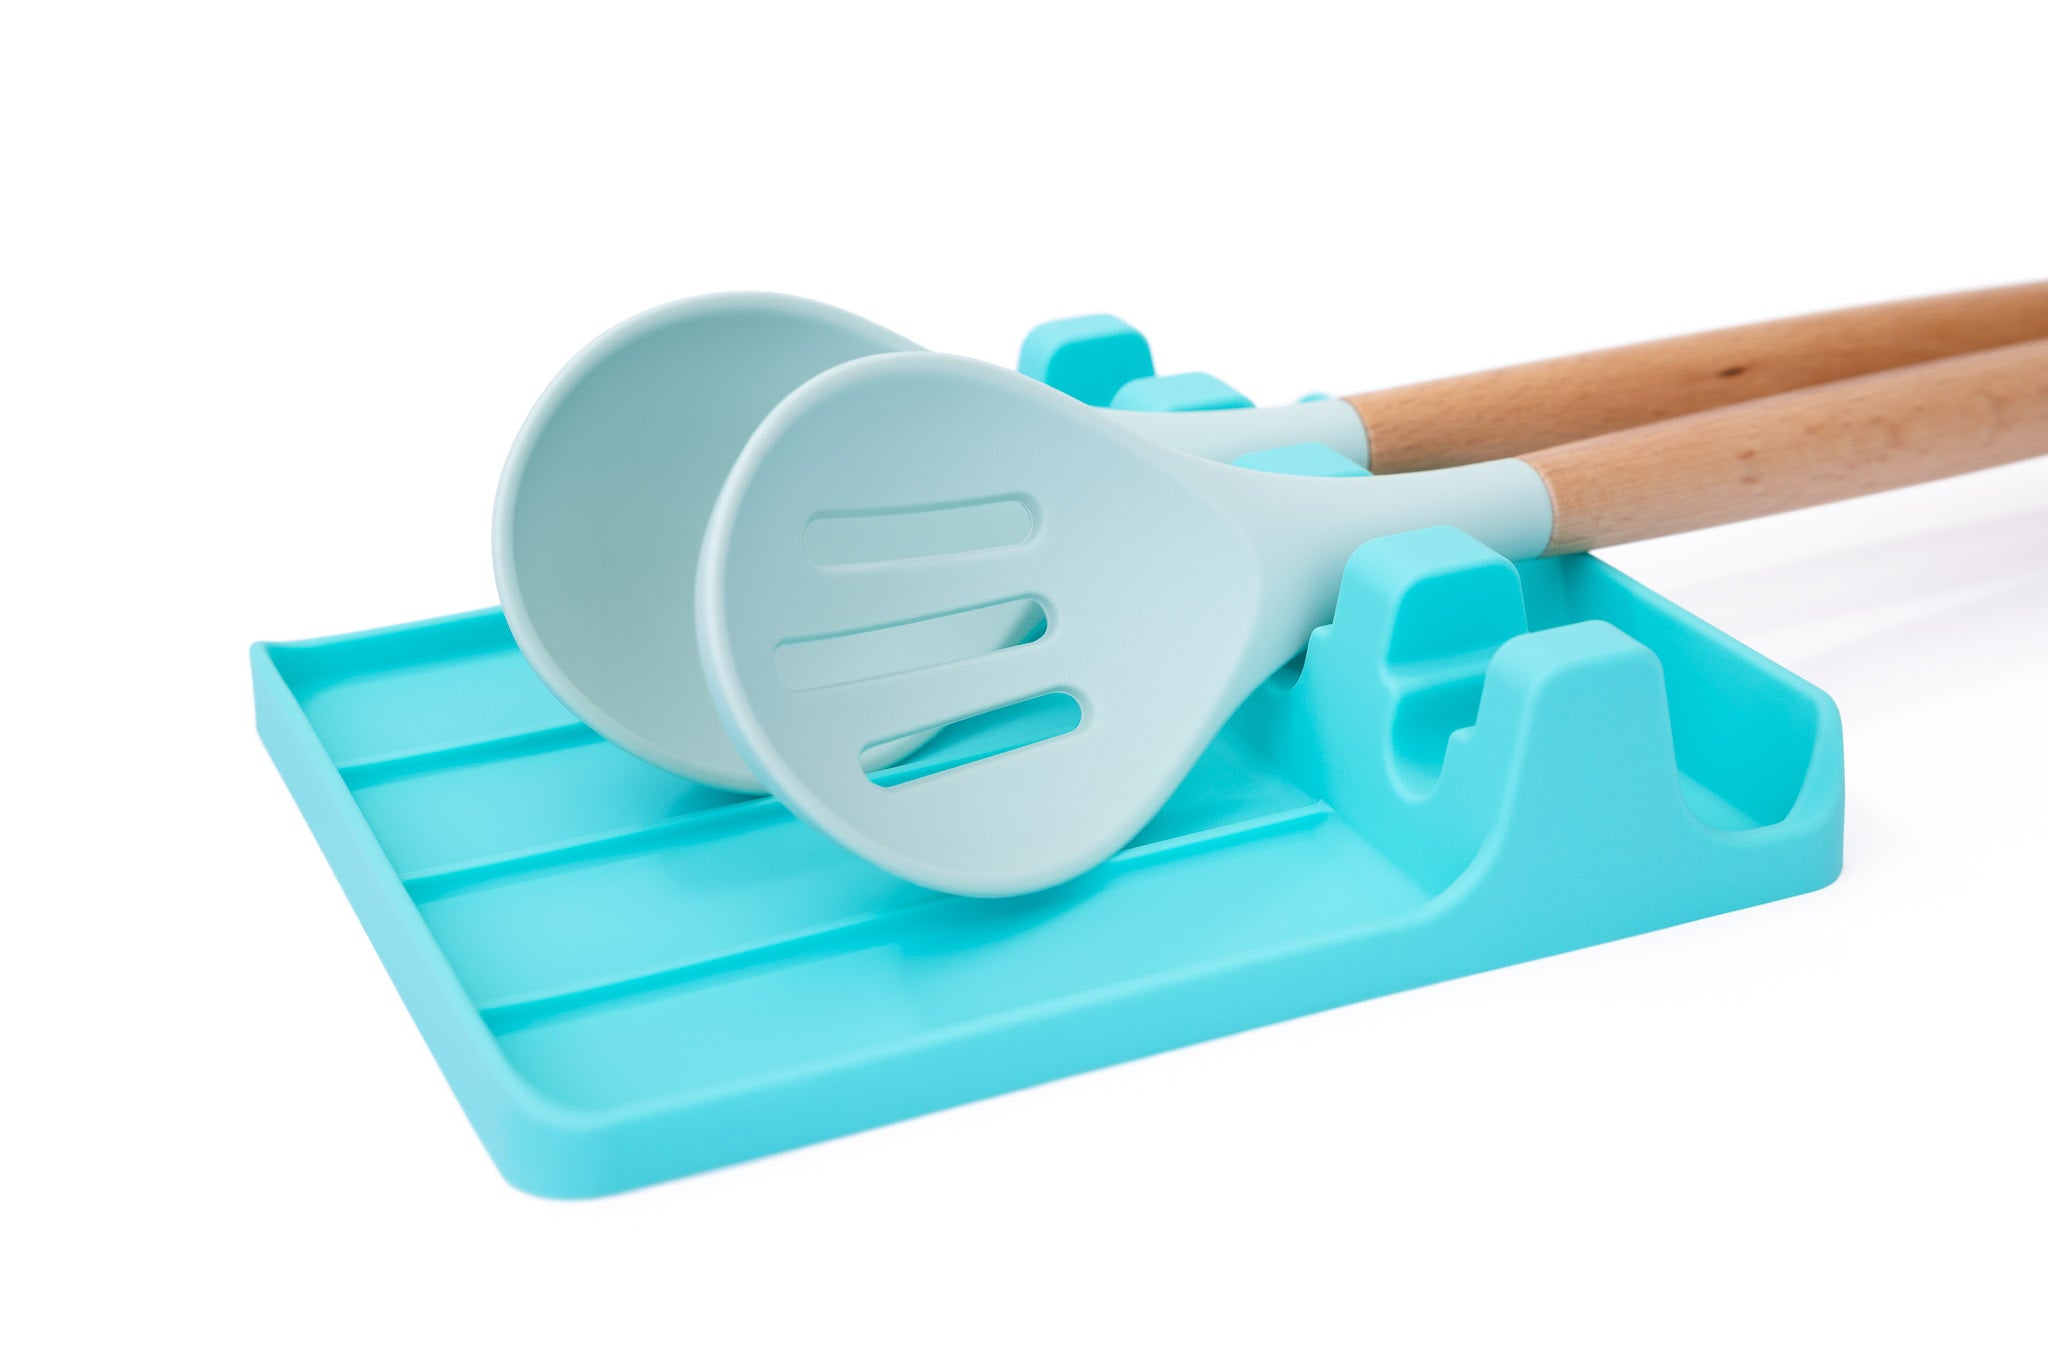  UHMER Silicone Utensil Rest with Drip Pad, Large Spoon